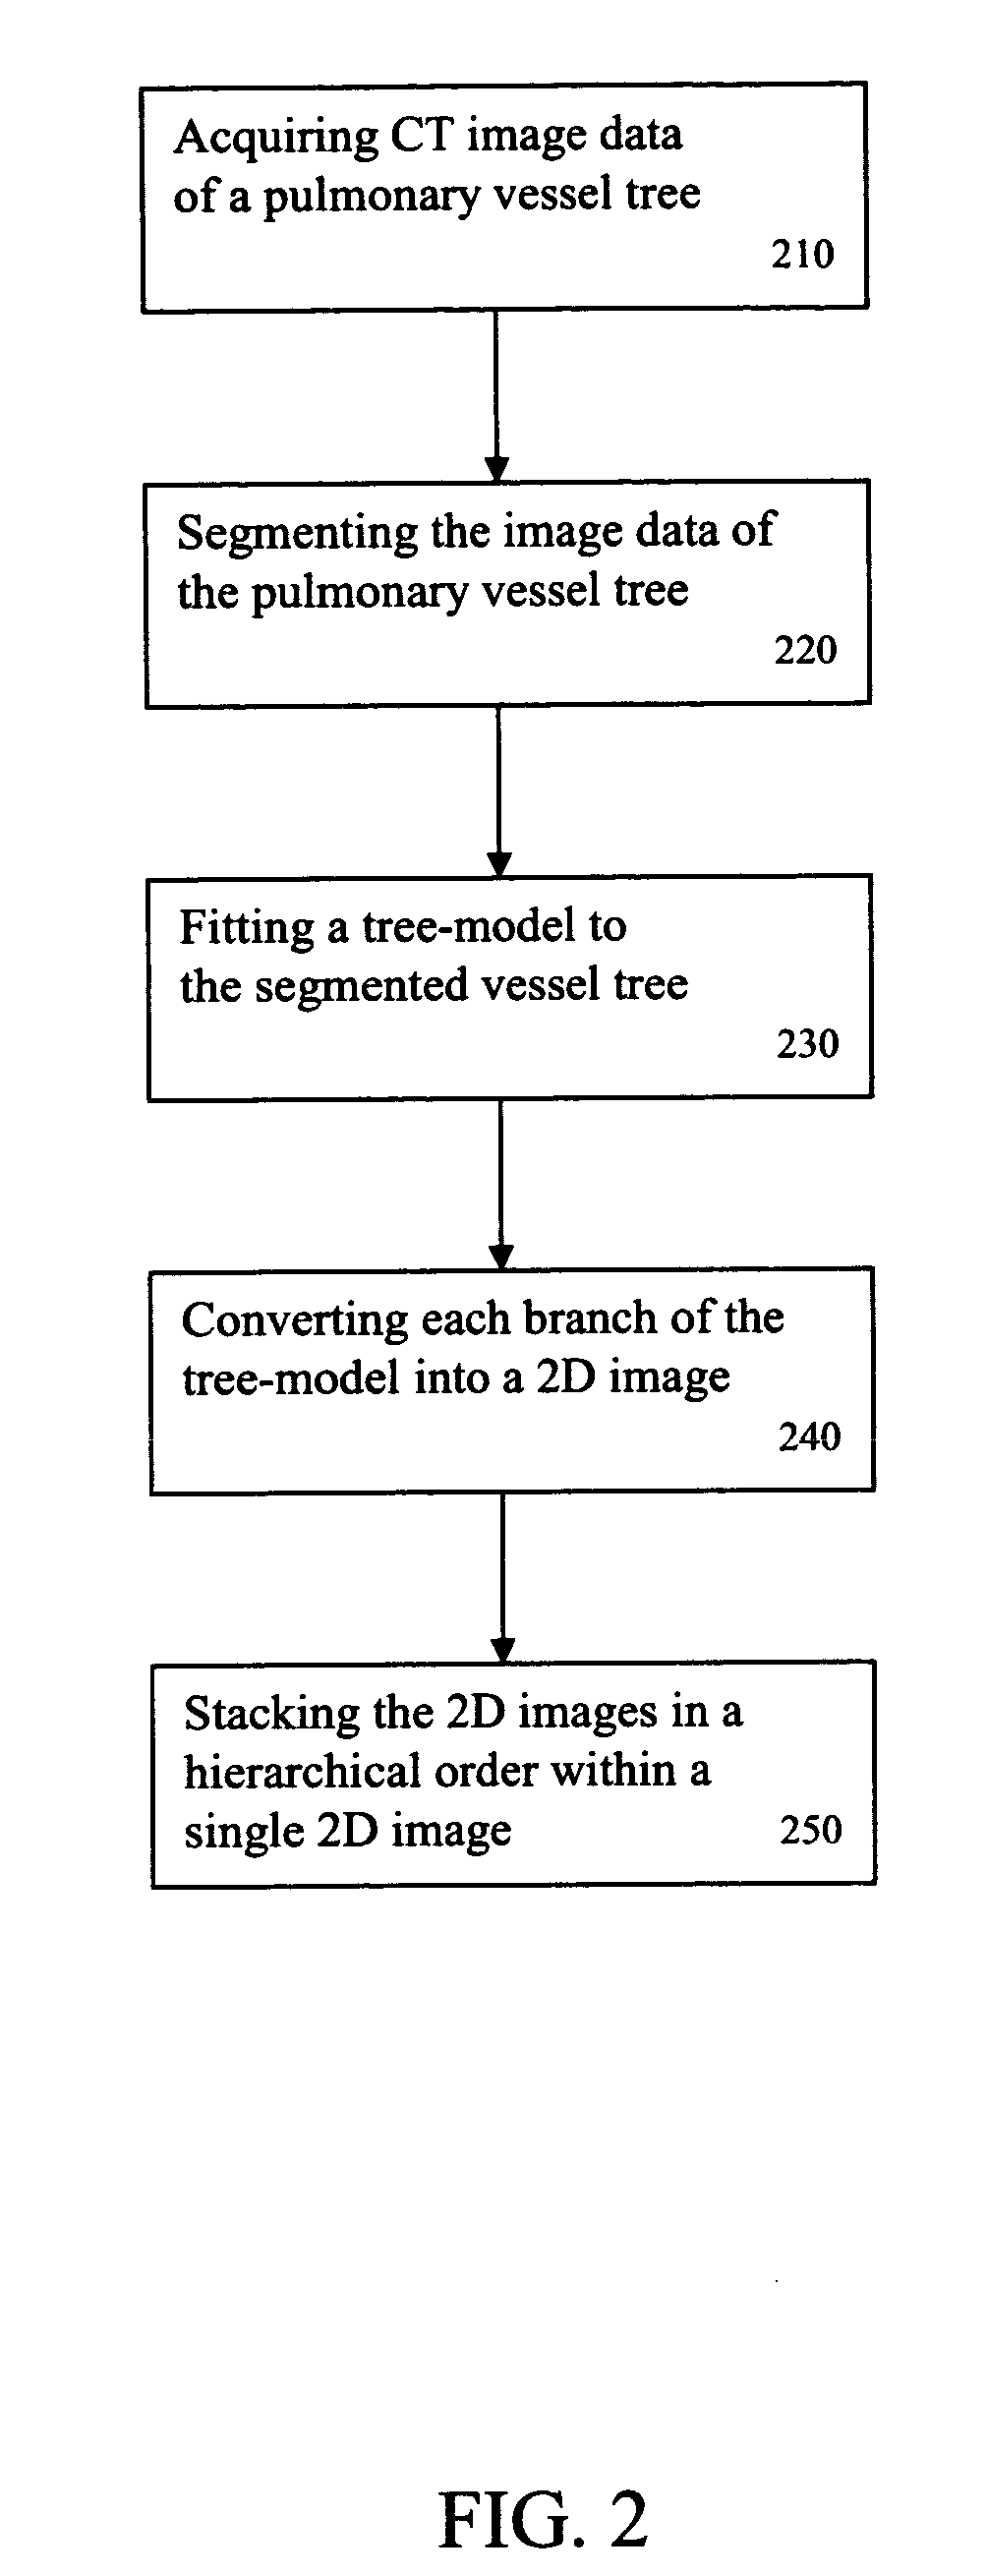 System and method for tree-model visualization for pulmonary embolism detection